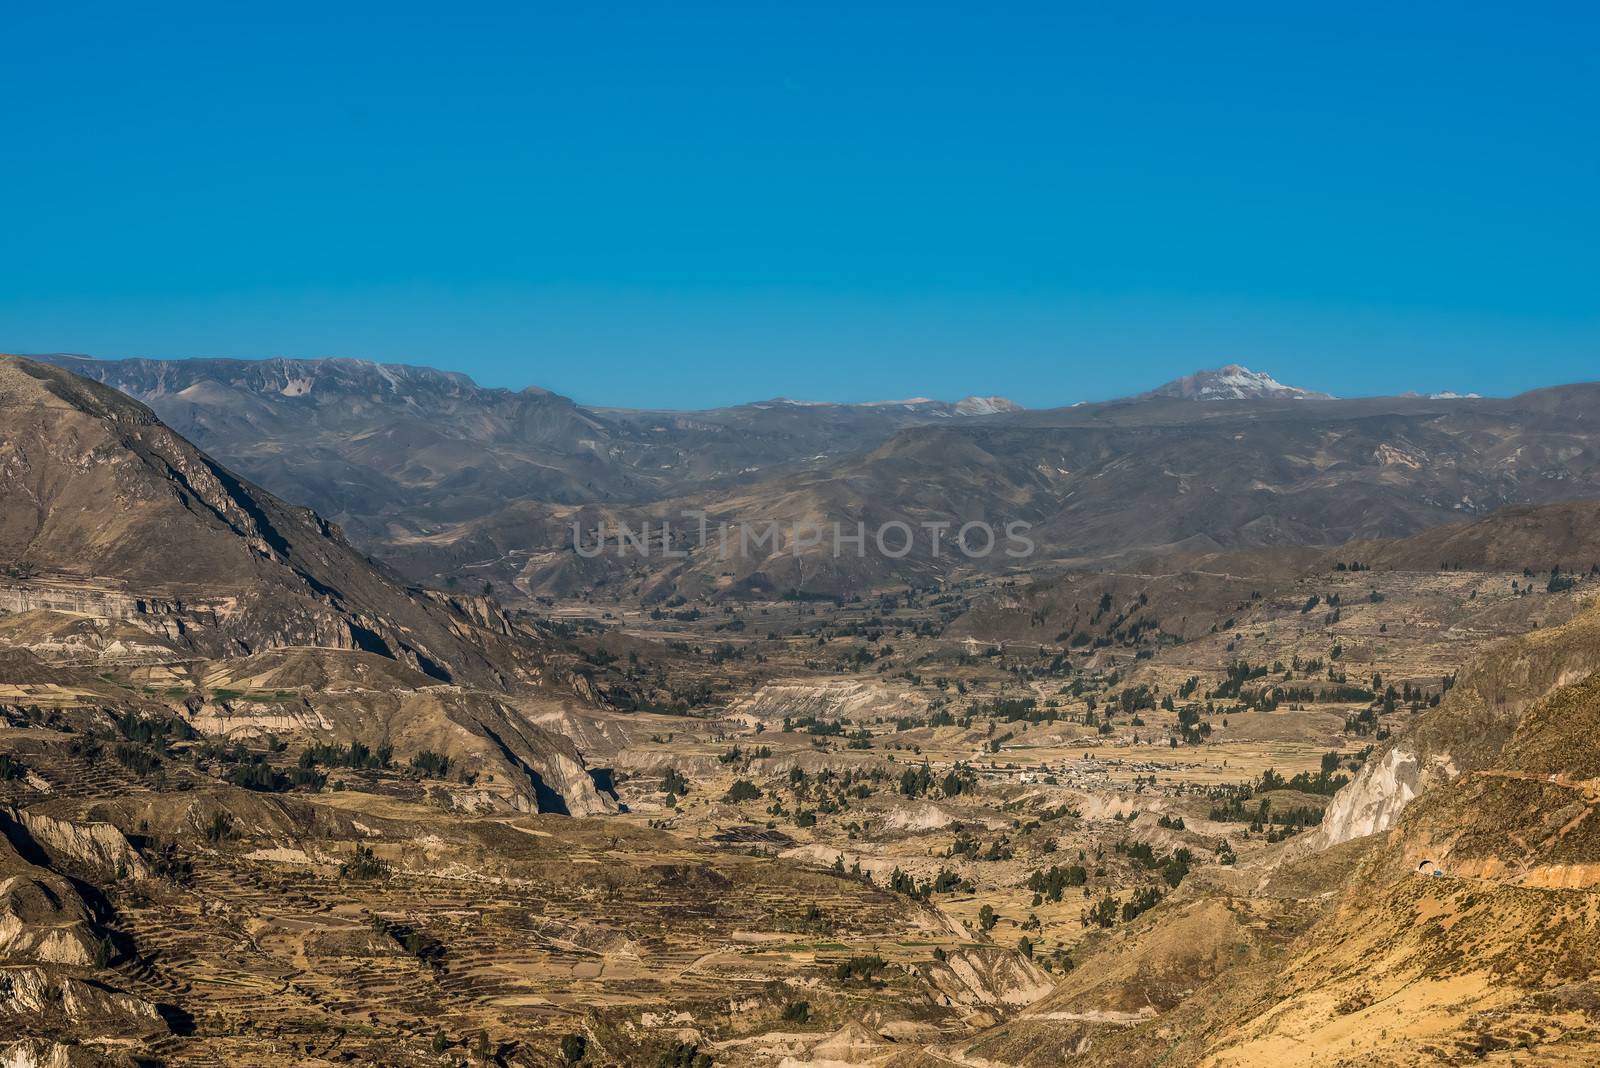 aerial view of Colca Canyon in the peruvian Andes at Arequipa Peru